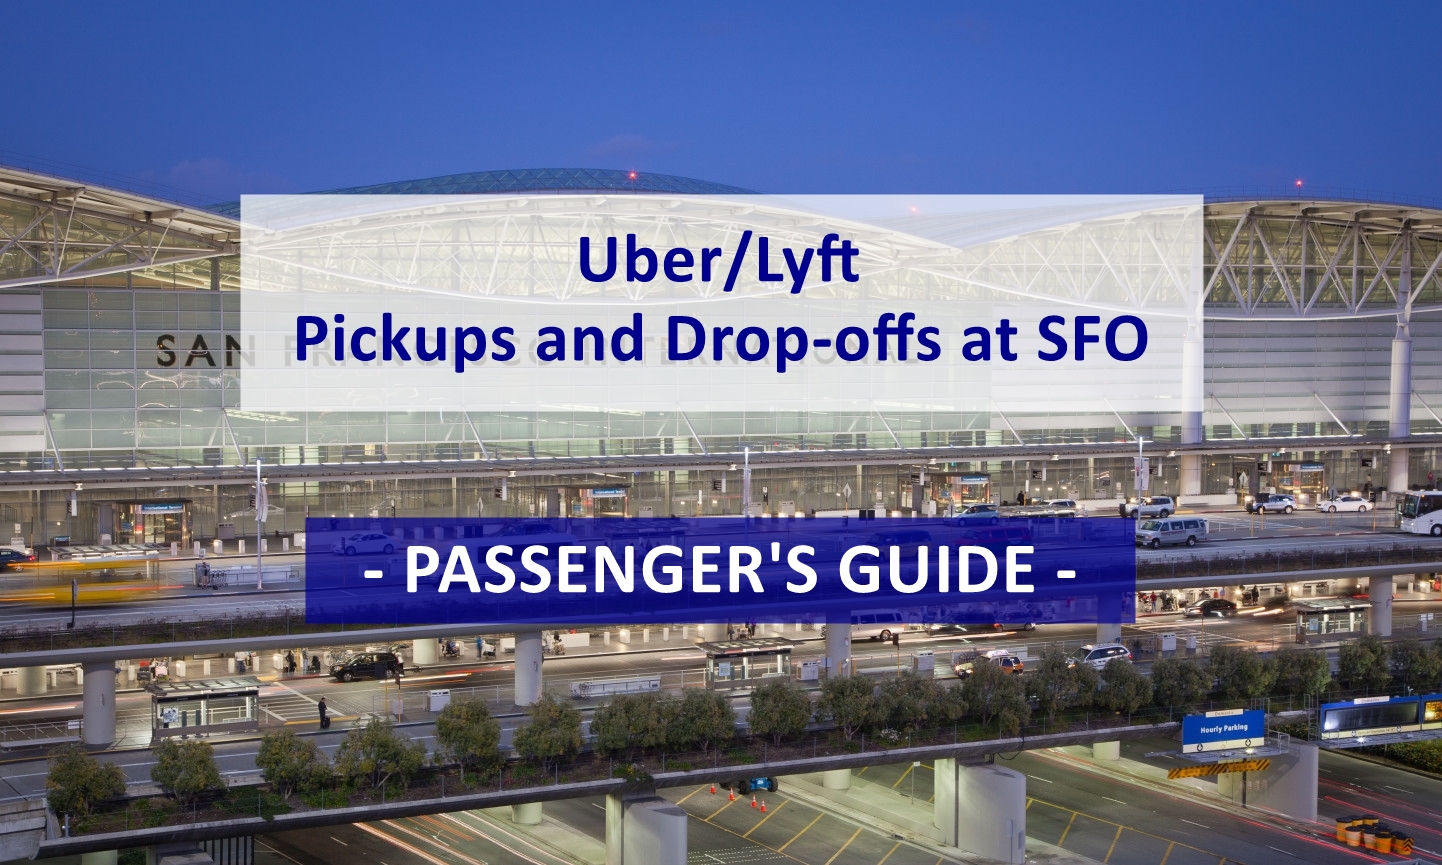 SFO - Uber Lyft Passenger Guide to Pickups and Drop-offs